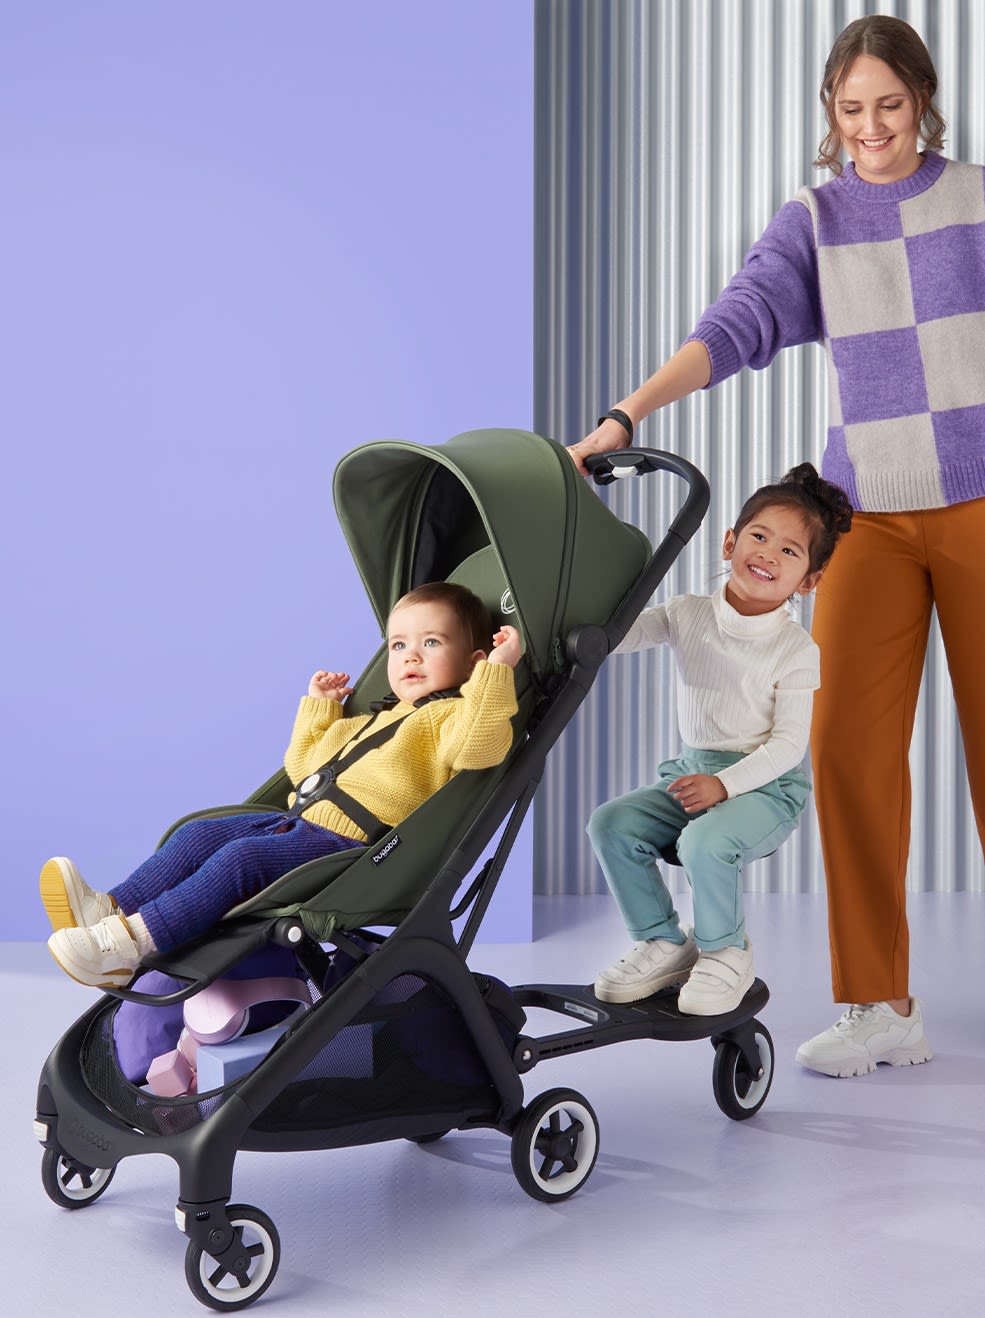 Two small kids with their mother and a butterfly stroller from Bugaboo